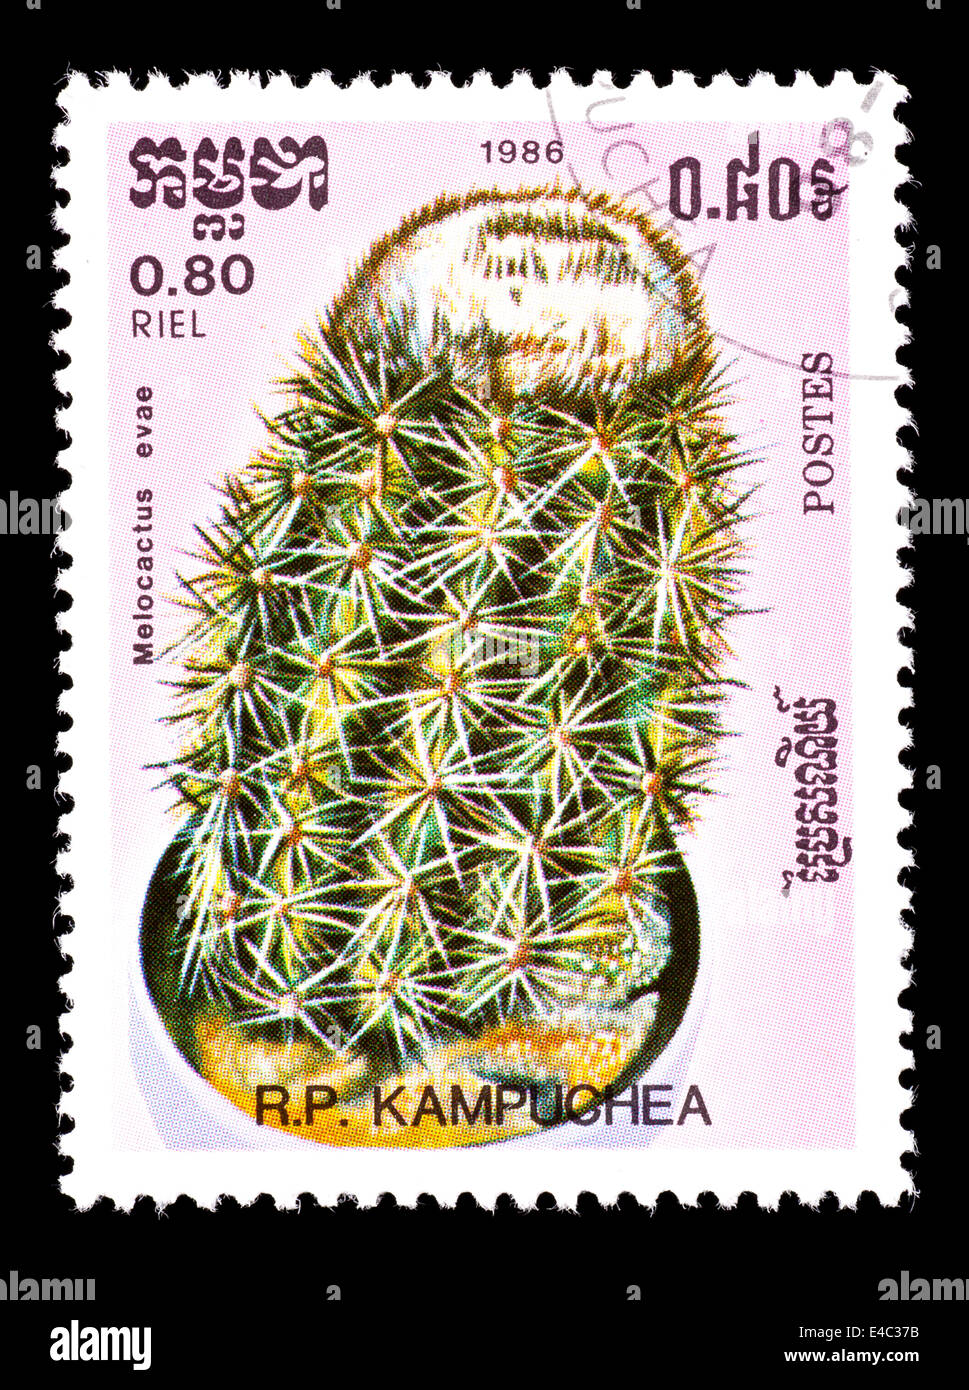 Postage stamp from Kampuchea (Cambodia) depicting rare cactus species (Melocactus harlowii) Stock Photo